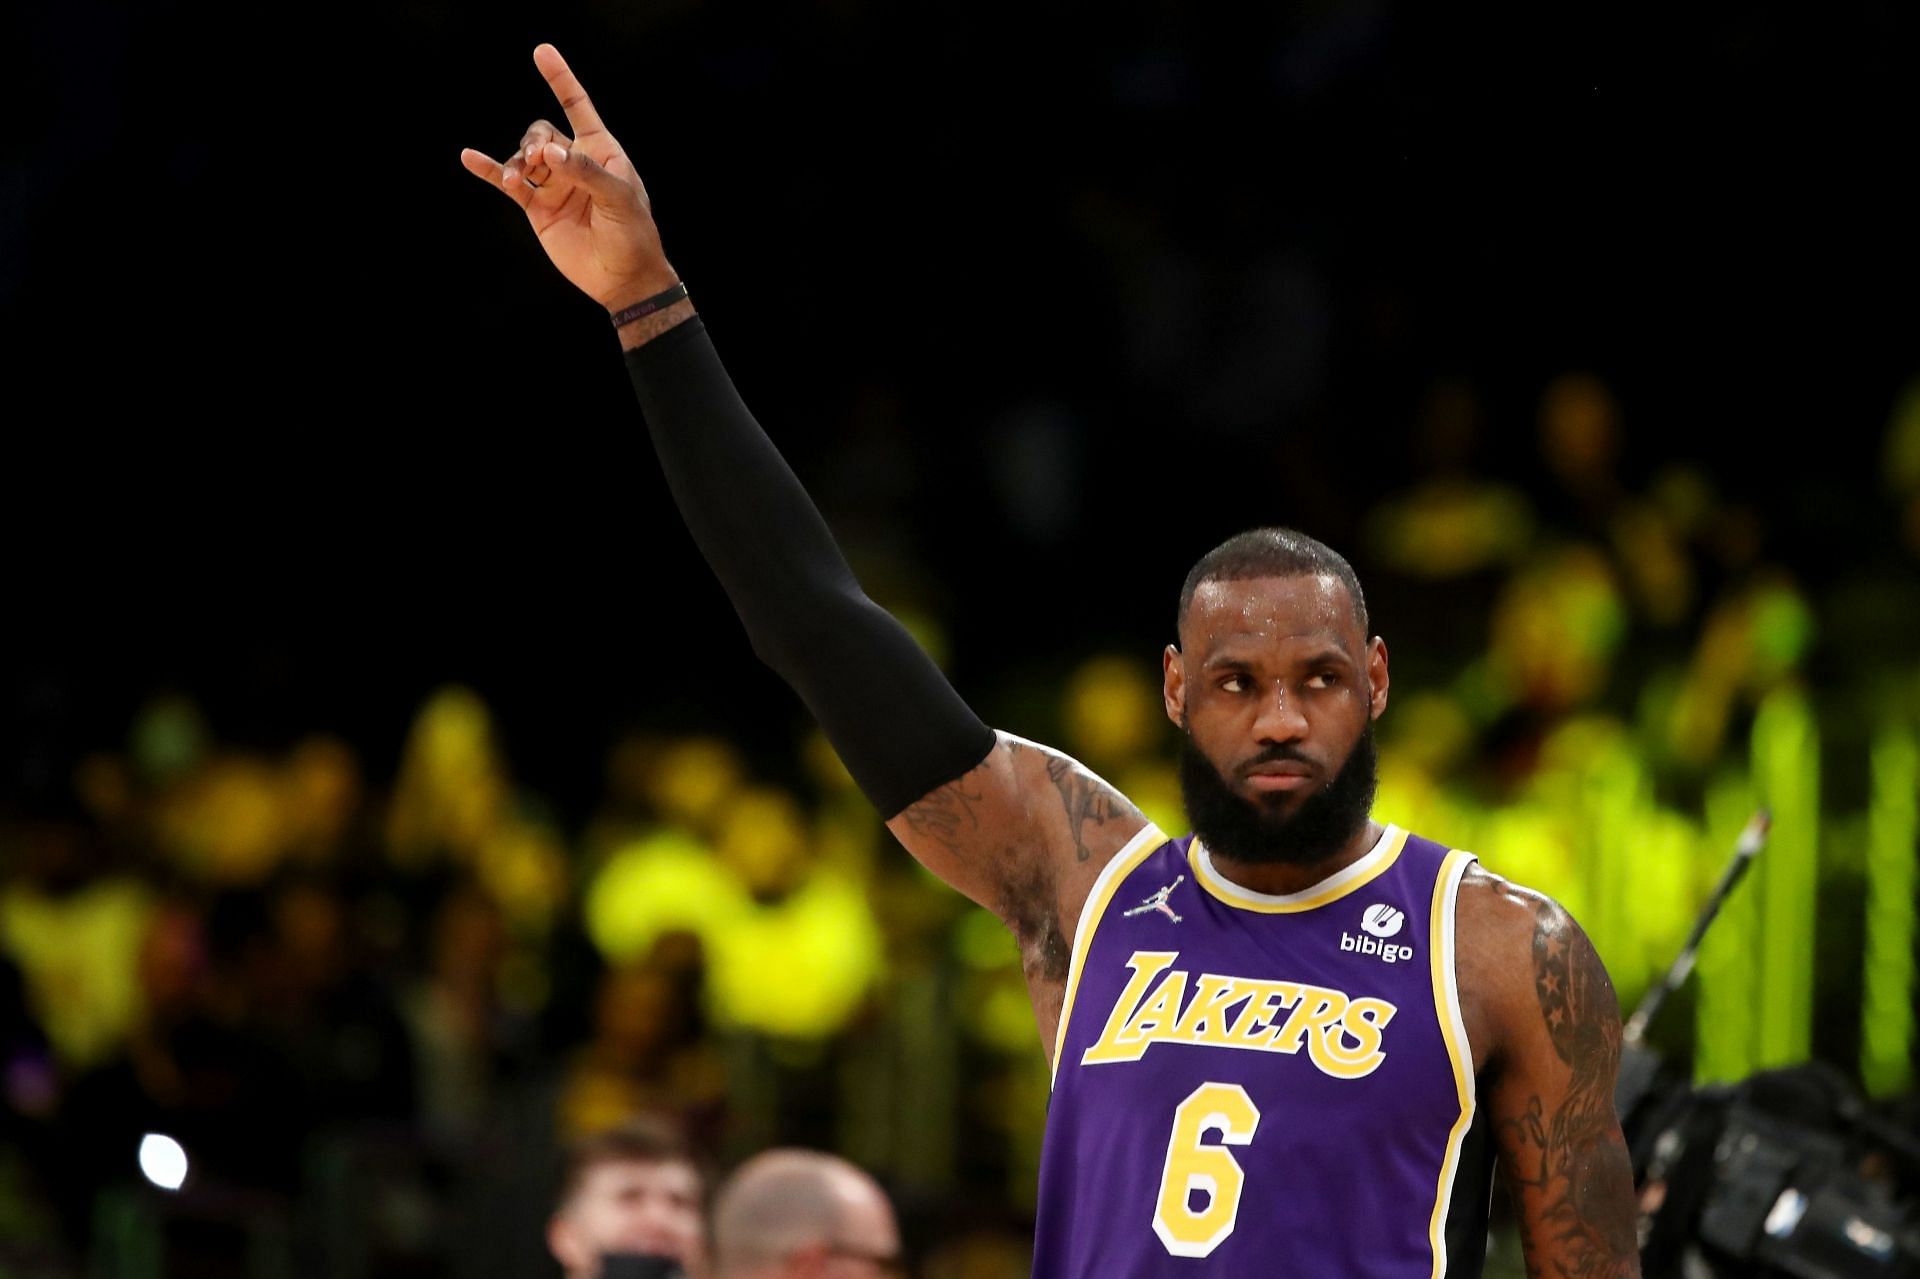 LeBron James of the LA Lakers acknowledges the crowd during a game against the Utah Jazz on Wednesday in Los Angeles, California.